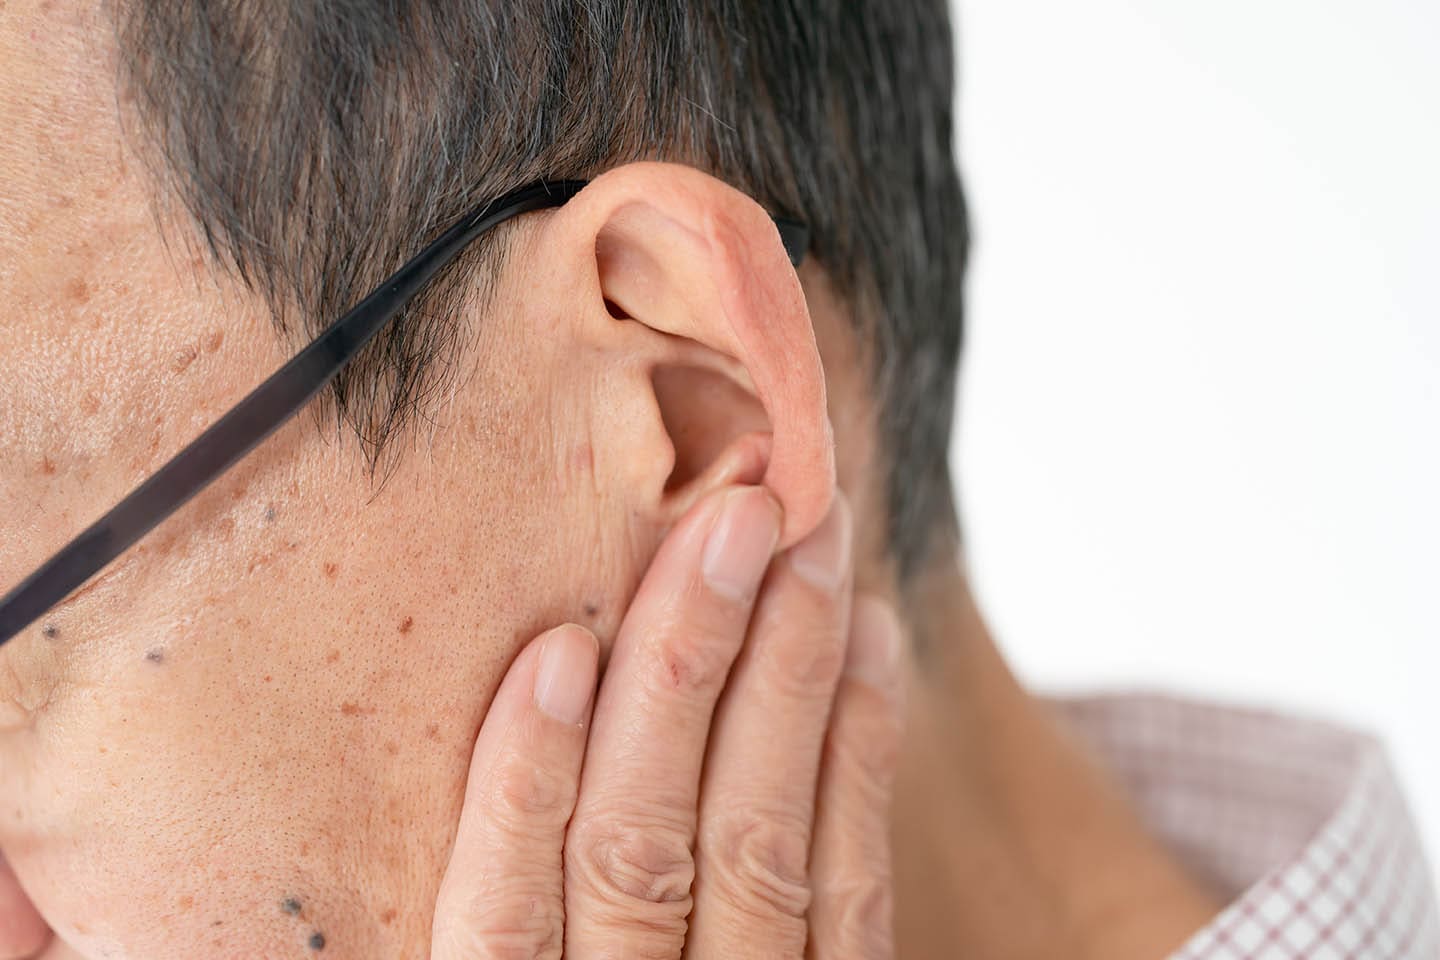 Man with earwax pain touching his ears